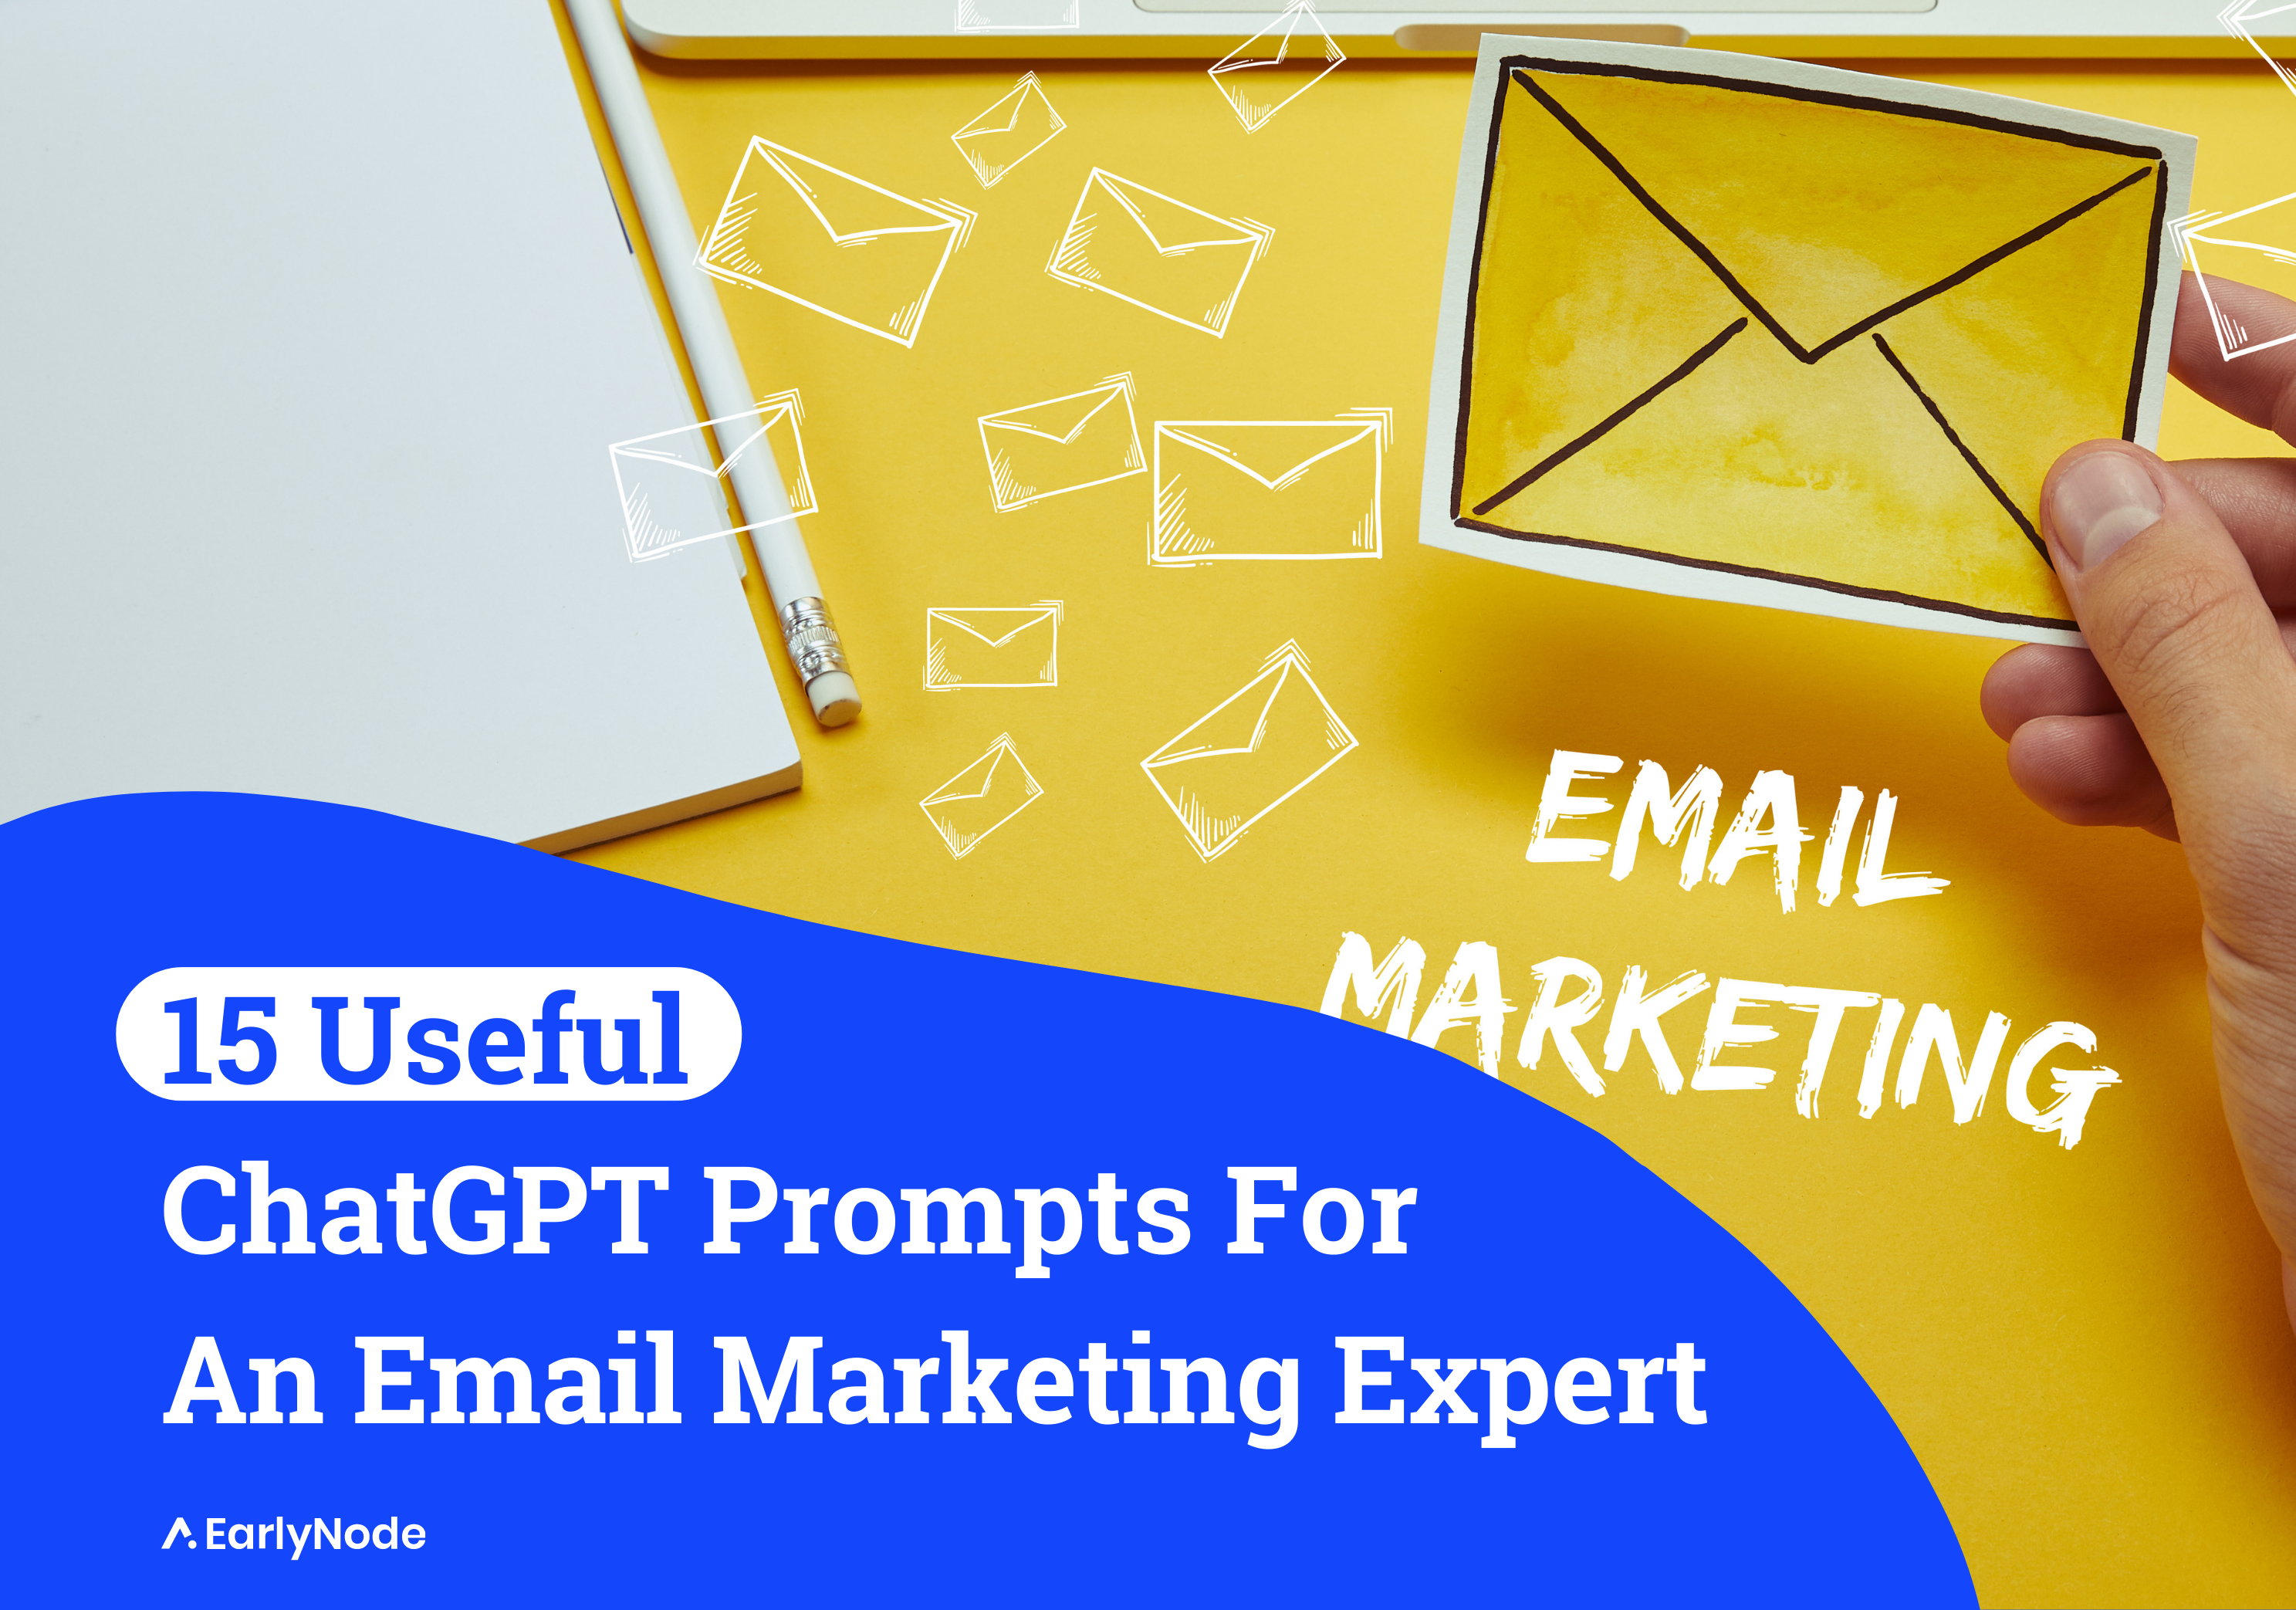 15 ChatGPT Prompts for Email Marketing Experts